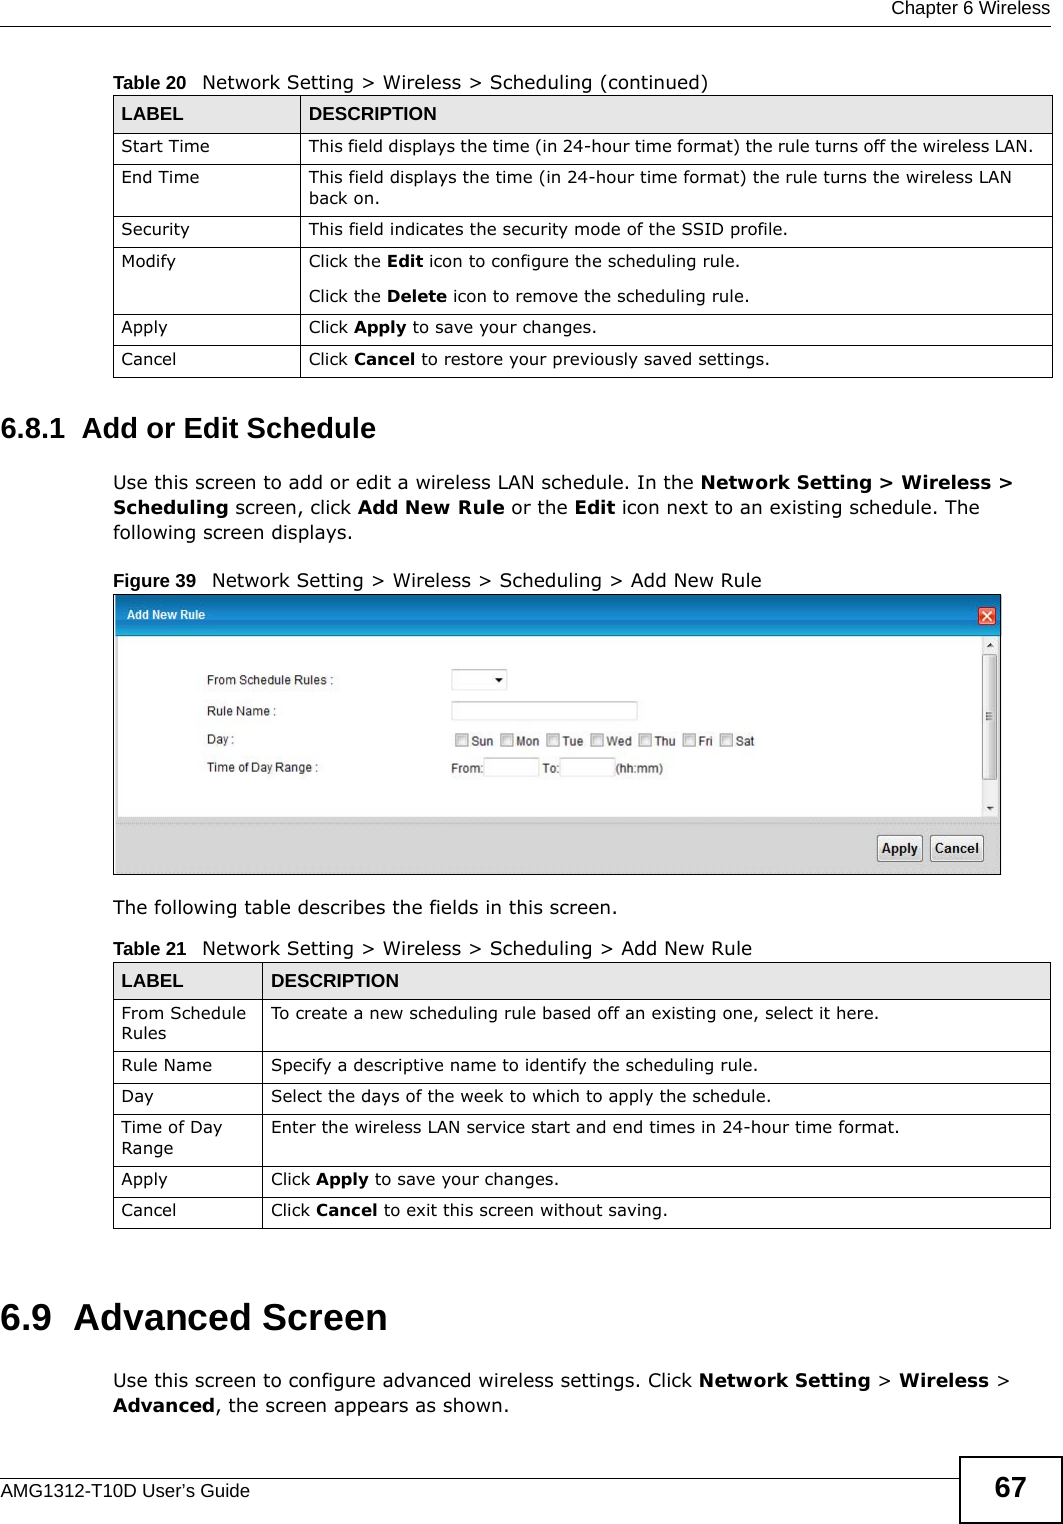  Chapter 6 WirelessAMG1312-T10D User’s Guide 676.8.1  Add or Edit ScheduleUse this screen to add or edit a wireless LAN schedule. In the Network Setting &gt; Wireless &gt; Scheduling screen, click Add New Rule or the Edit icon next to an existing schedule. The following screen displays.Figure 39   Network Setting &gt; Wireless &gt; Scheduling &gt; Add New RuleThe following table describes the fields in this screen.6.9  Advanced ScreenUse this screen to configure advanced wireless settings. Click Network Setting &gt; Wireless &gt; Advanced, the screen appears as shown.Start Time This field displays the time (in 24-hour time format) the rule turns off the wireless LAN.  End Time This field displays the time (in 24-hour time format) the rule turns the wireless LAN back on.  Security This field indicates the security mode of the SSID profile.Modify Click the Edit icon to configure the scheduling rule.Click the Delete icon to remove the scheduling rule.Apply Click Apply to save your changes.Cancel Click Cancel to restore your previously saved settings.Table 20   Network Setting &gt; Wireless &gt; Scheduling (continued)LABEL DESCRIPTIONTable 21   Network Setting &gt; Wireless &gt; Scheduling &gt; Add New RuleLABEL DESCRIPTIONFrom Schedule RulesTo create a new scheduling rule based off an existing one, select it here.Rule Name Specify a descriptive name to identify the scheduling rule.Day Select the days of the week to which to apply the schedule.Time of Day RangeEnter the wireless LAN service start and end times in 24-hour time format. Apply Click Apply to save your changes.Cancel Click Cancel to exit this screen without saving.